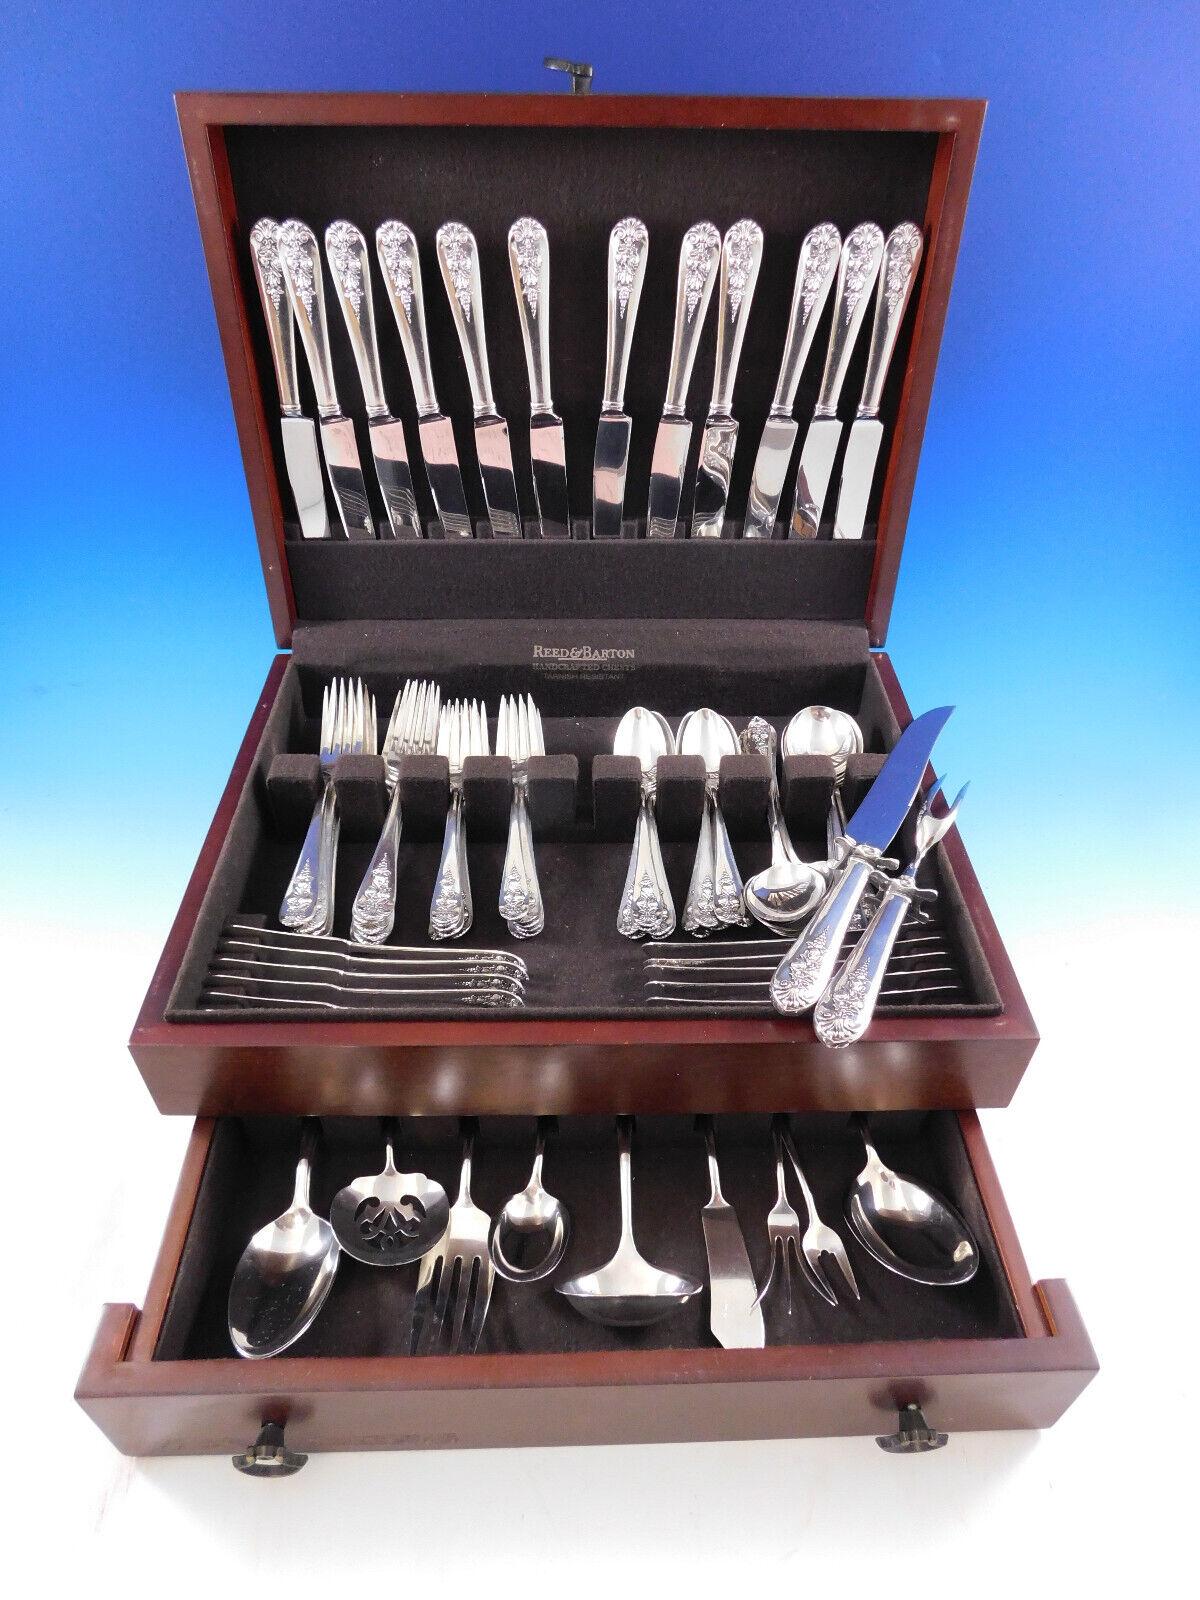 Rare Pendant of Fruit by Lunt, c1939, sterling silver Flatware set with gorgeous high-relief hanging fruit design, 84 pieces. This set includes:

12 knives, 9